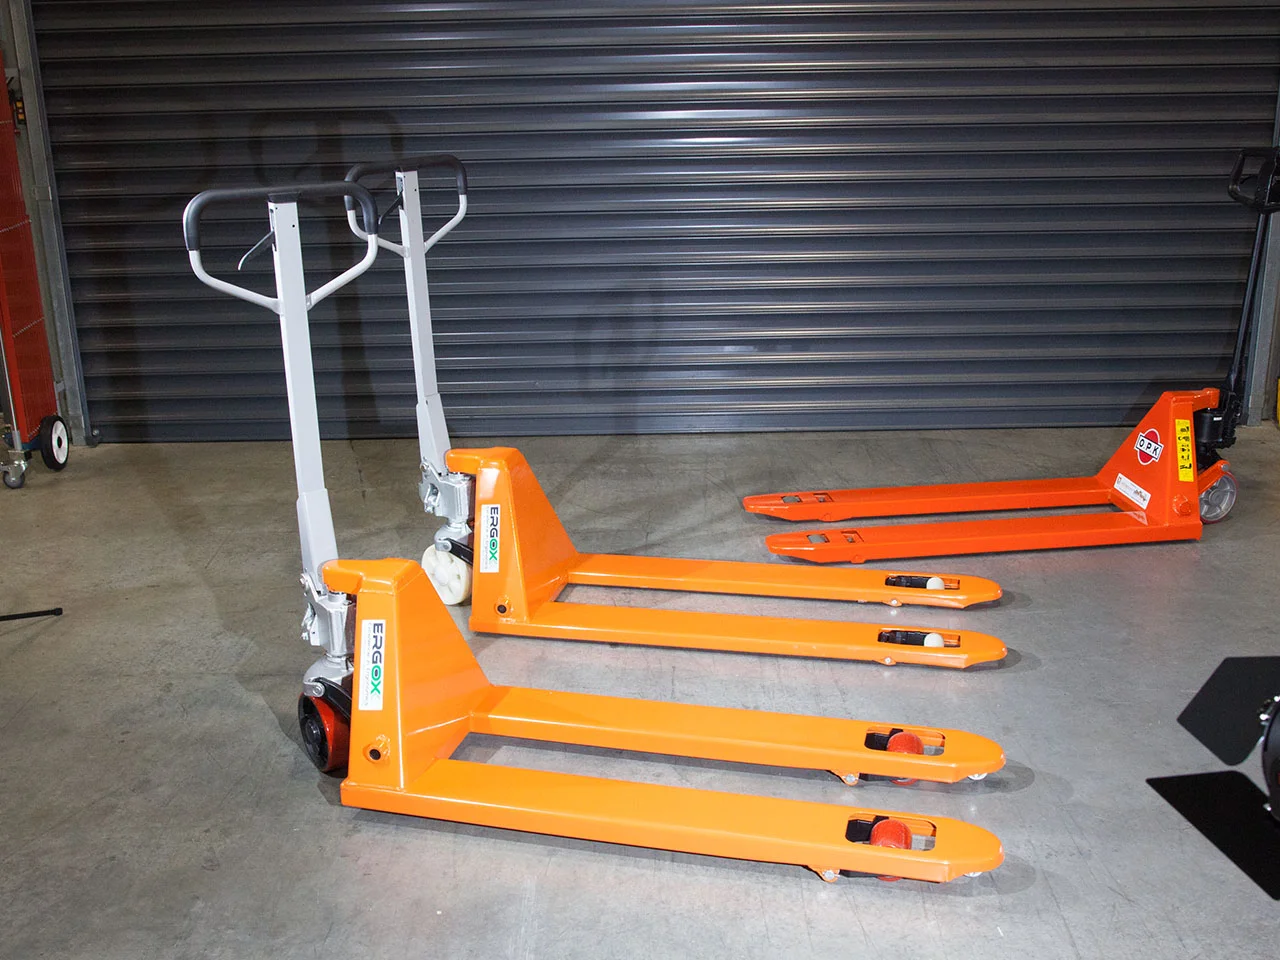 5 Pallet Jacks that will increase your productivity